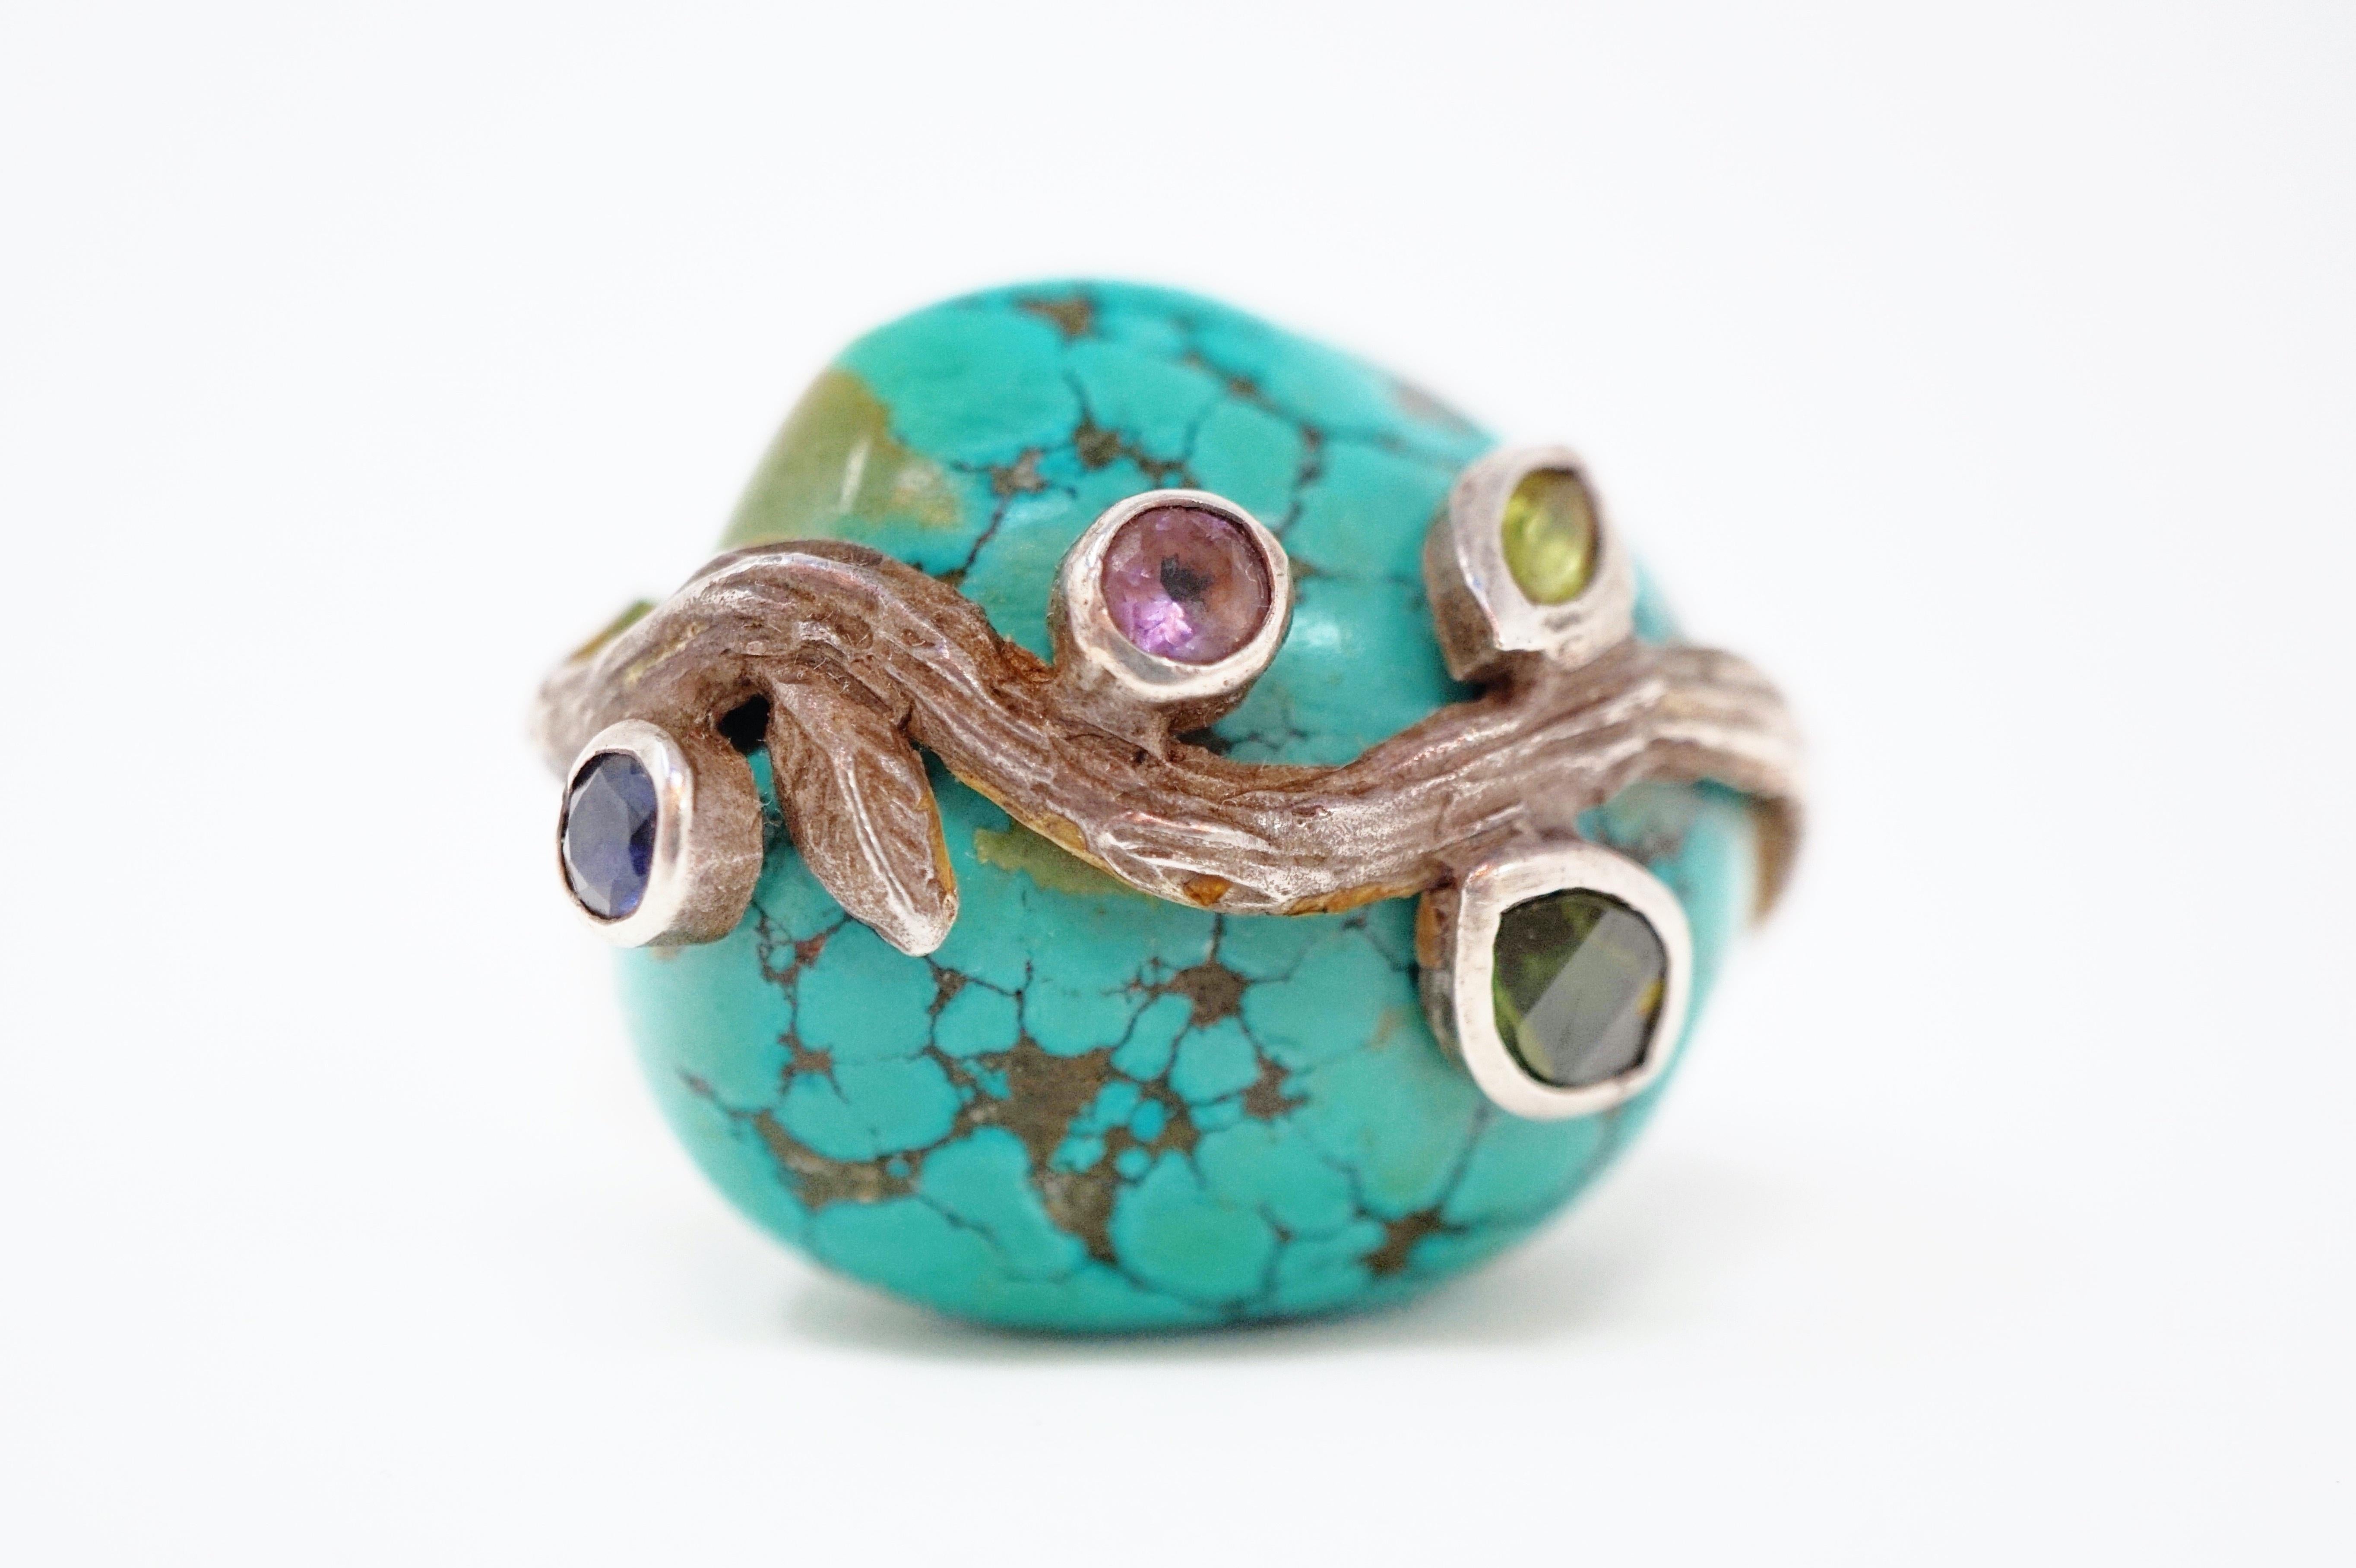 Women's Loulou de la Falaise Large Turquoise Cocktail Ring with Gemstone Accents